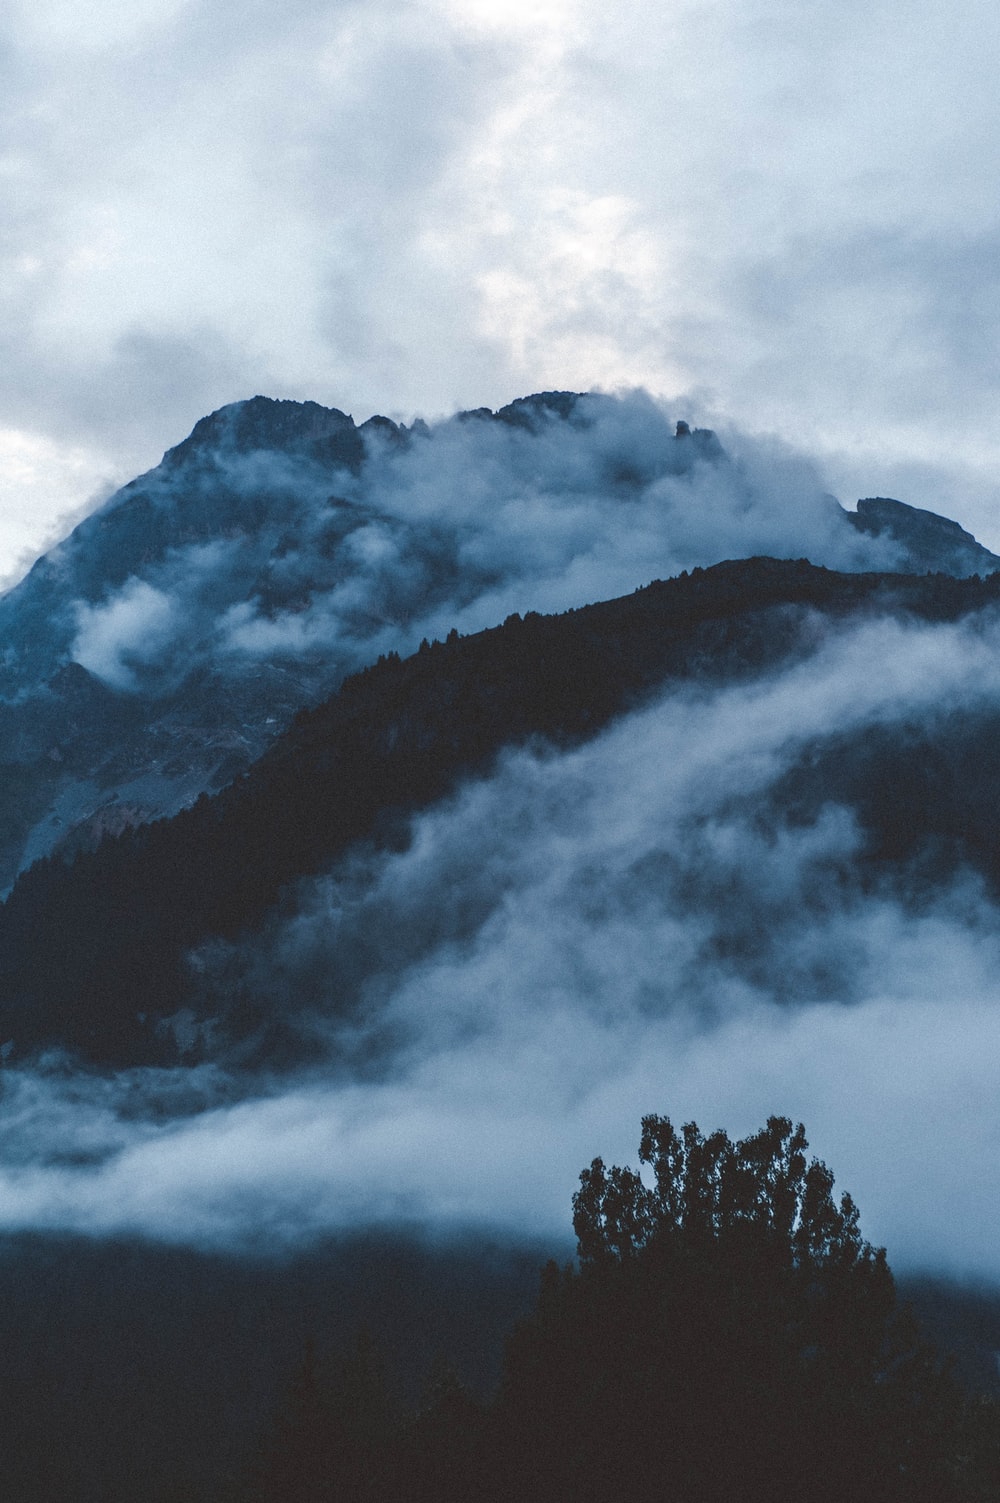 Misty Mountain Picture. Download Free Image